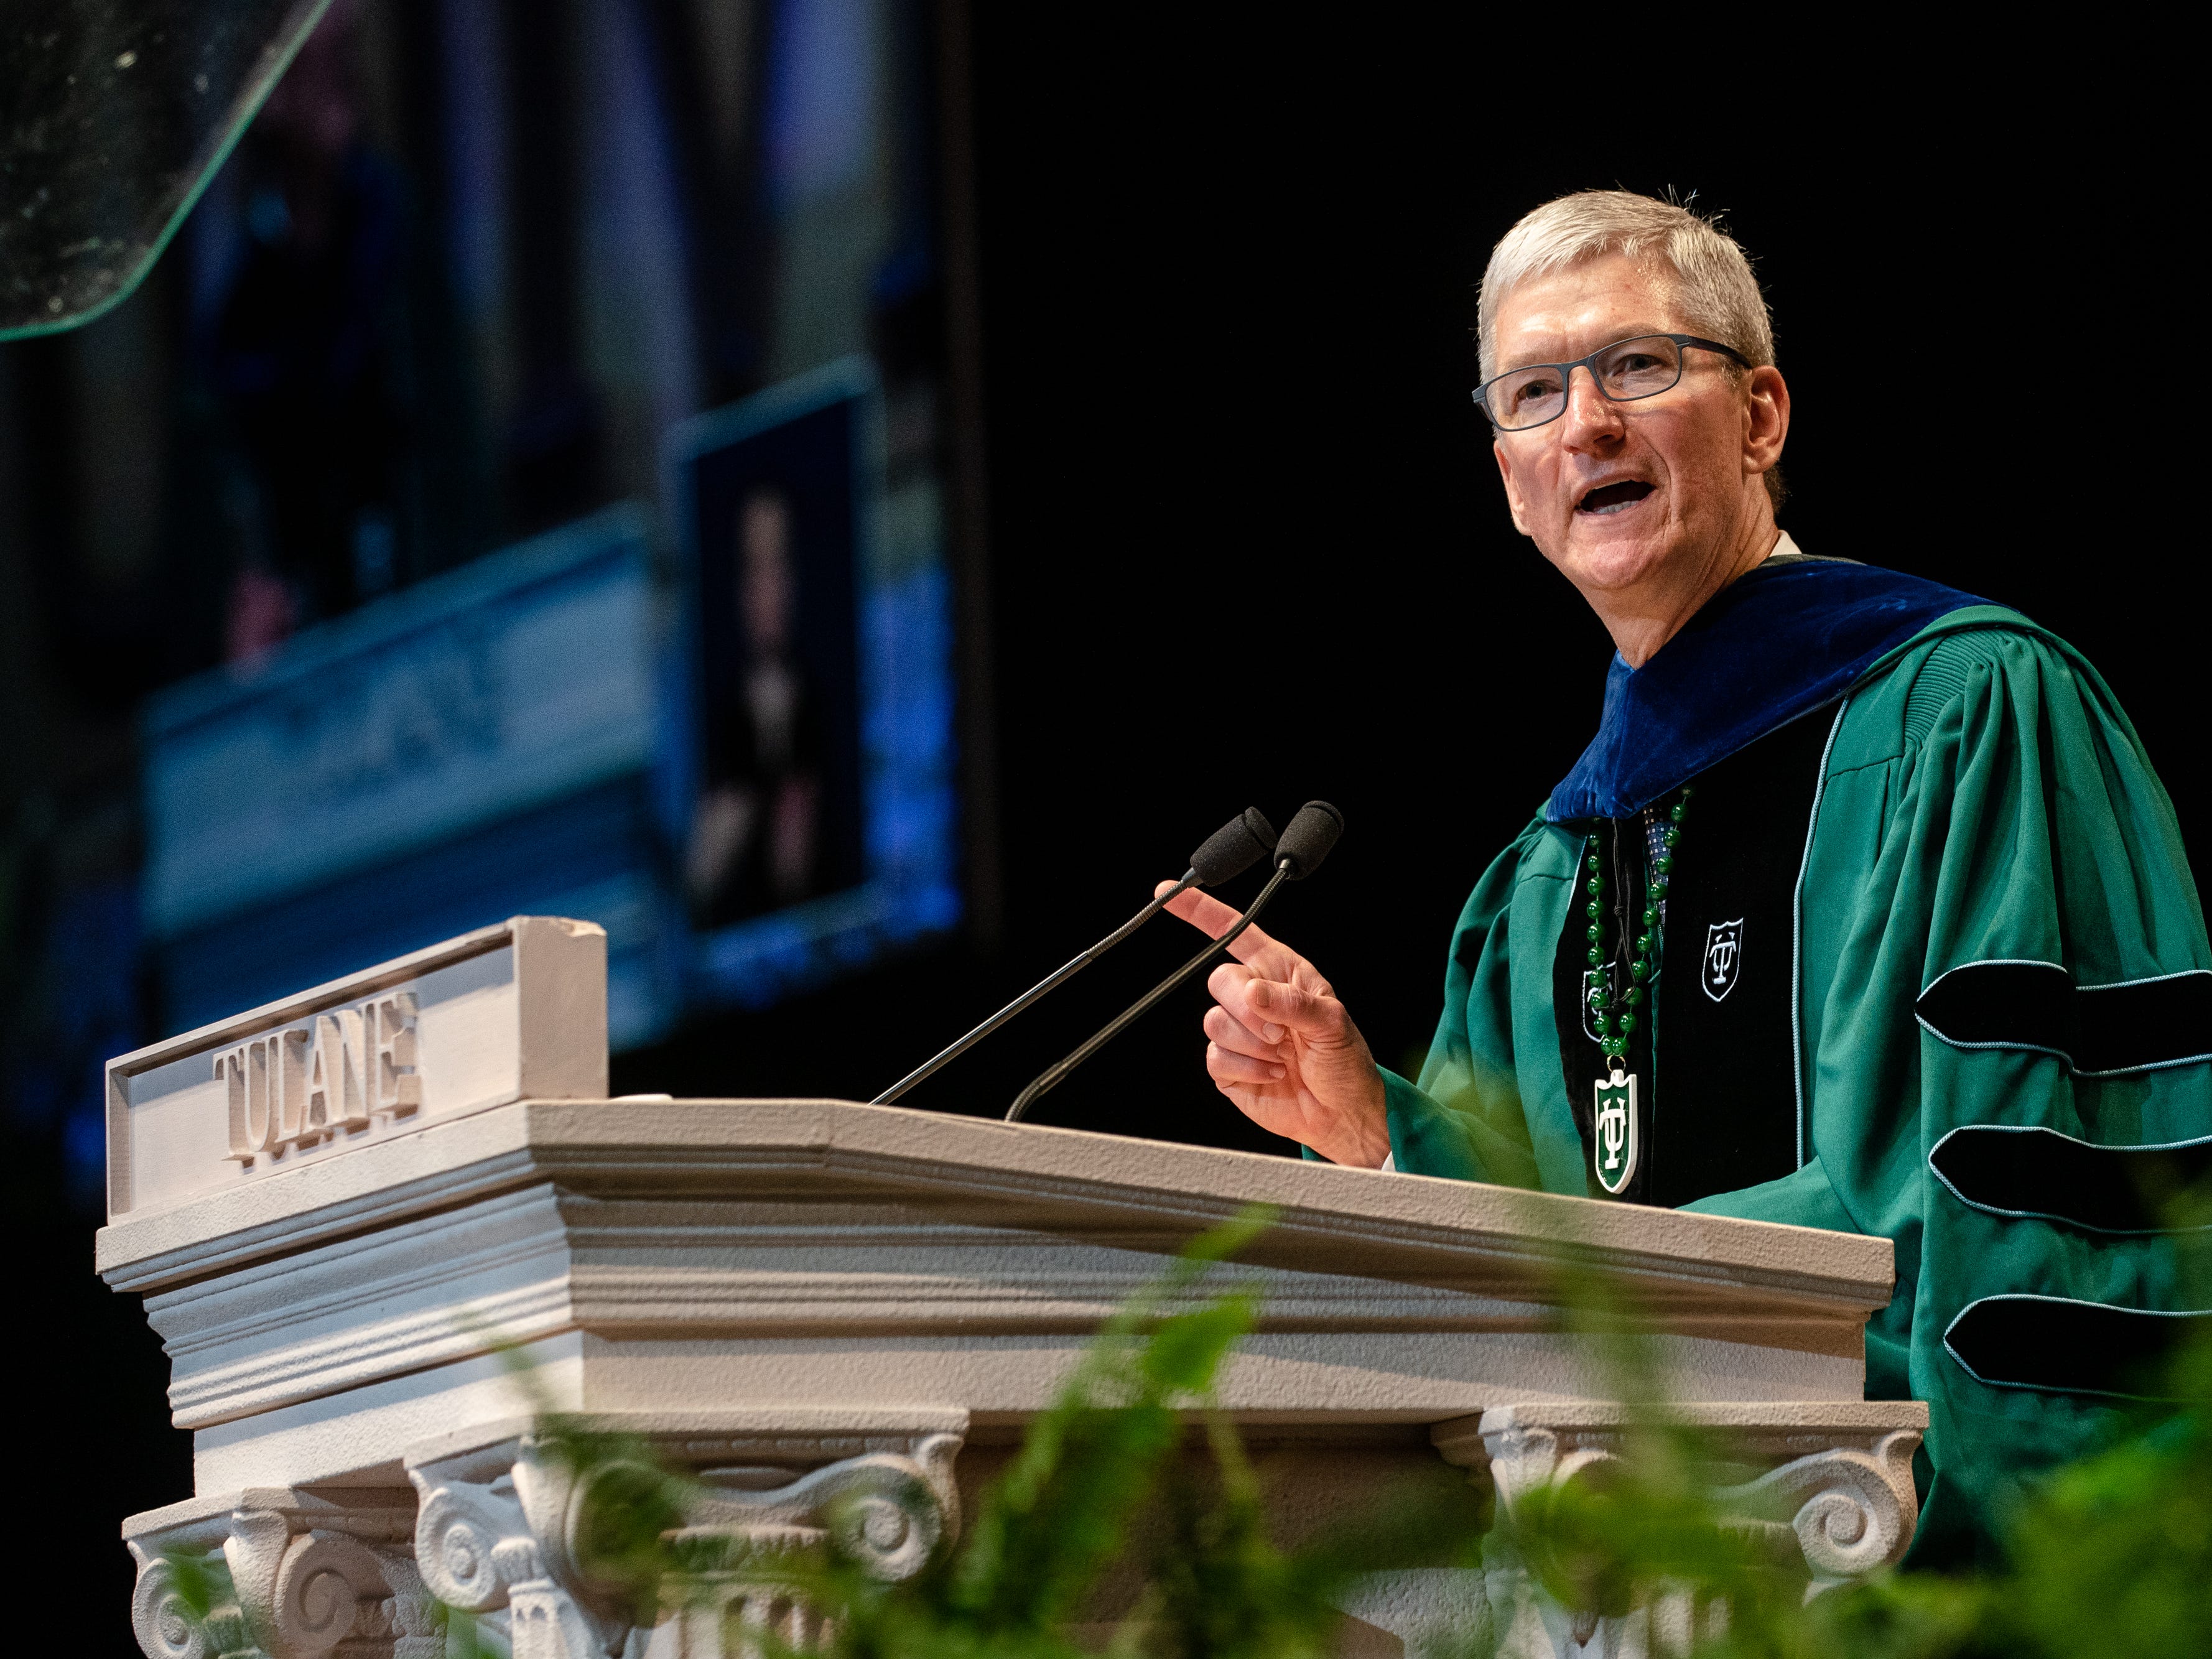 <p>Apple CEO Tim Cook delivered the 2019 commencement speech for the graduates of Tulane University, offering valuable advice on success.</p><p>"We forget sometimes that our preexisting beliefs have their own force of gravity," Cook said. "Today, certain algorithms pull toward you the things you already know, believe, or like, and they push away everything else. Push back."</p><p>"You may succeed. You may fail. But make it your life's work to remake the world because there is nothing more beautiful or more worthwhile than working to leave something better for humanity."</p>